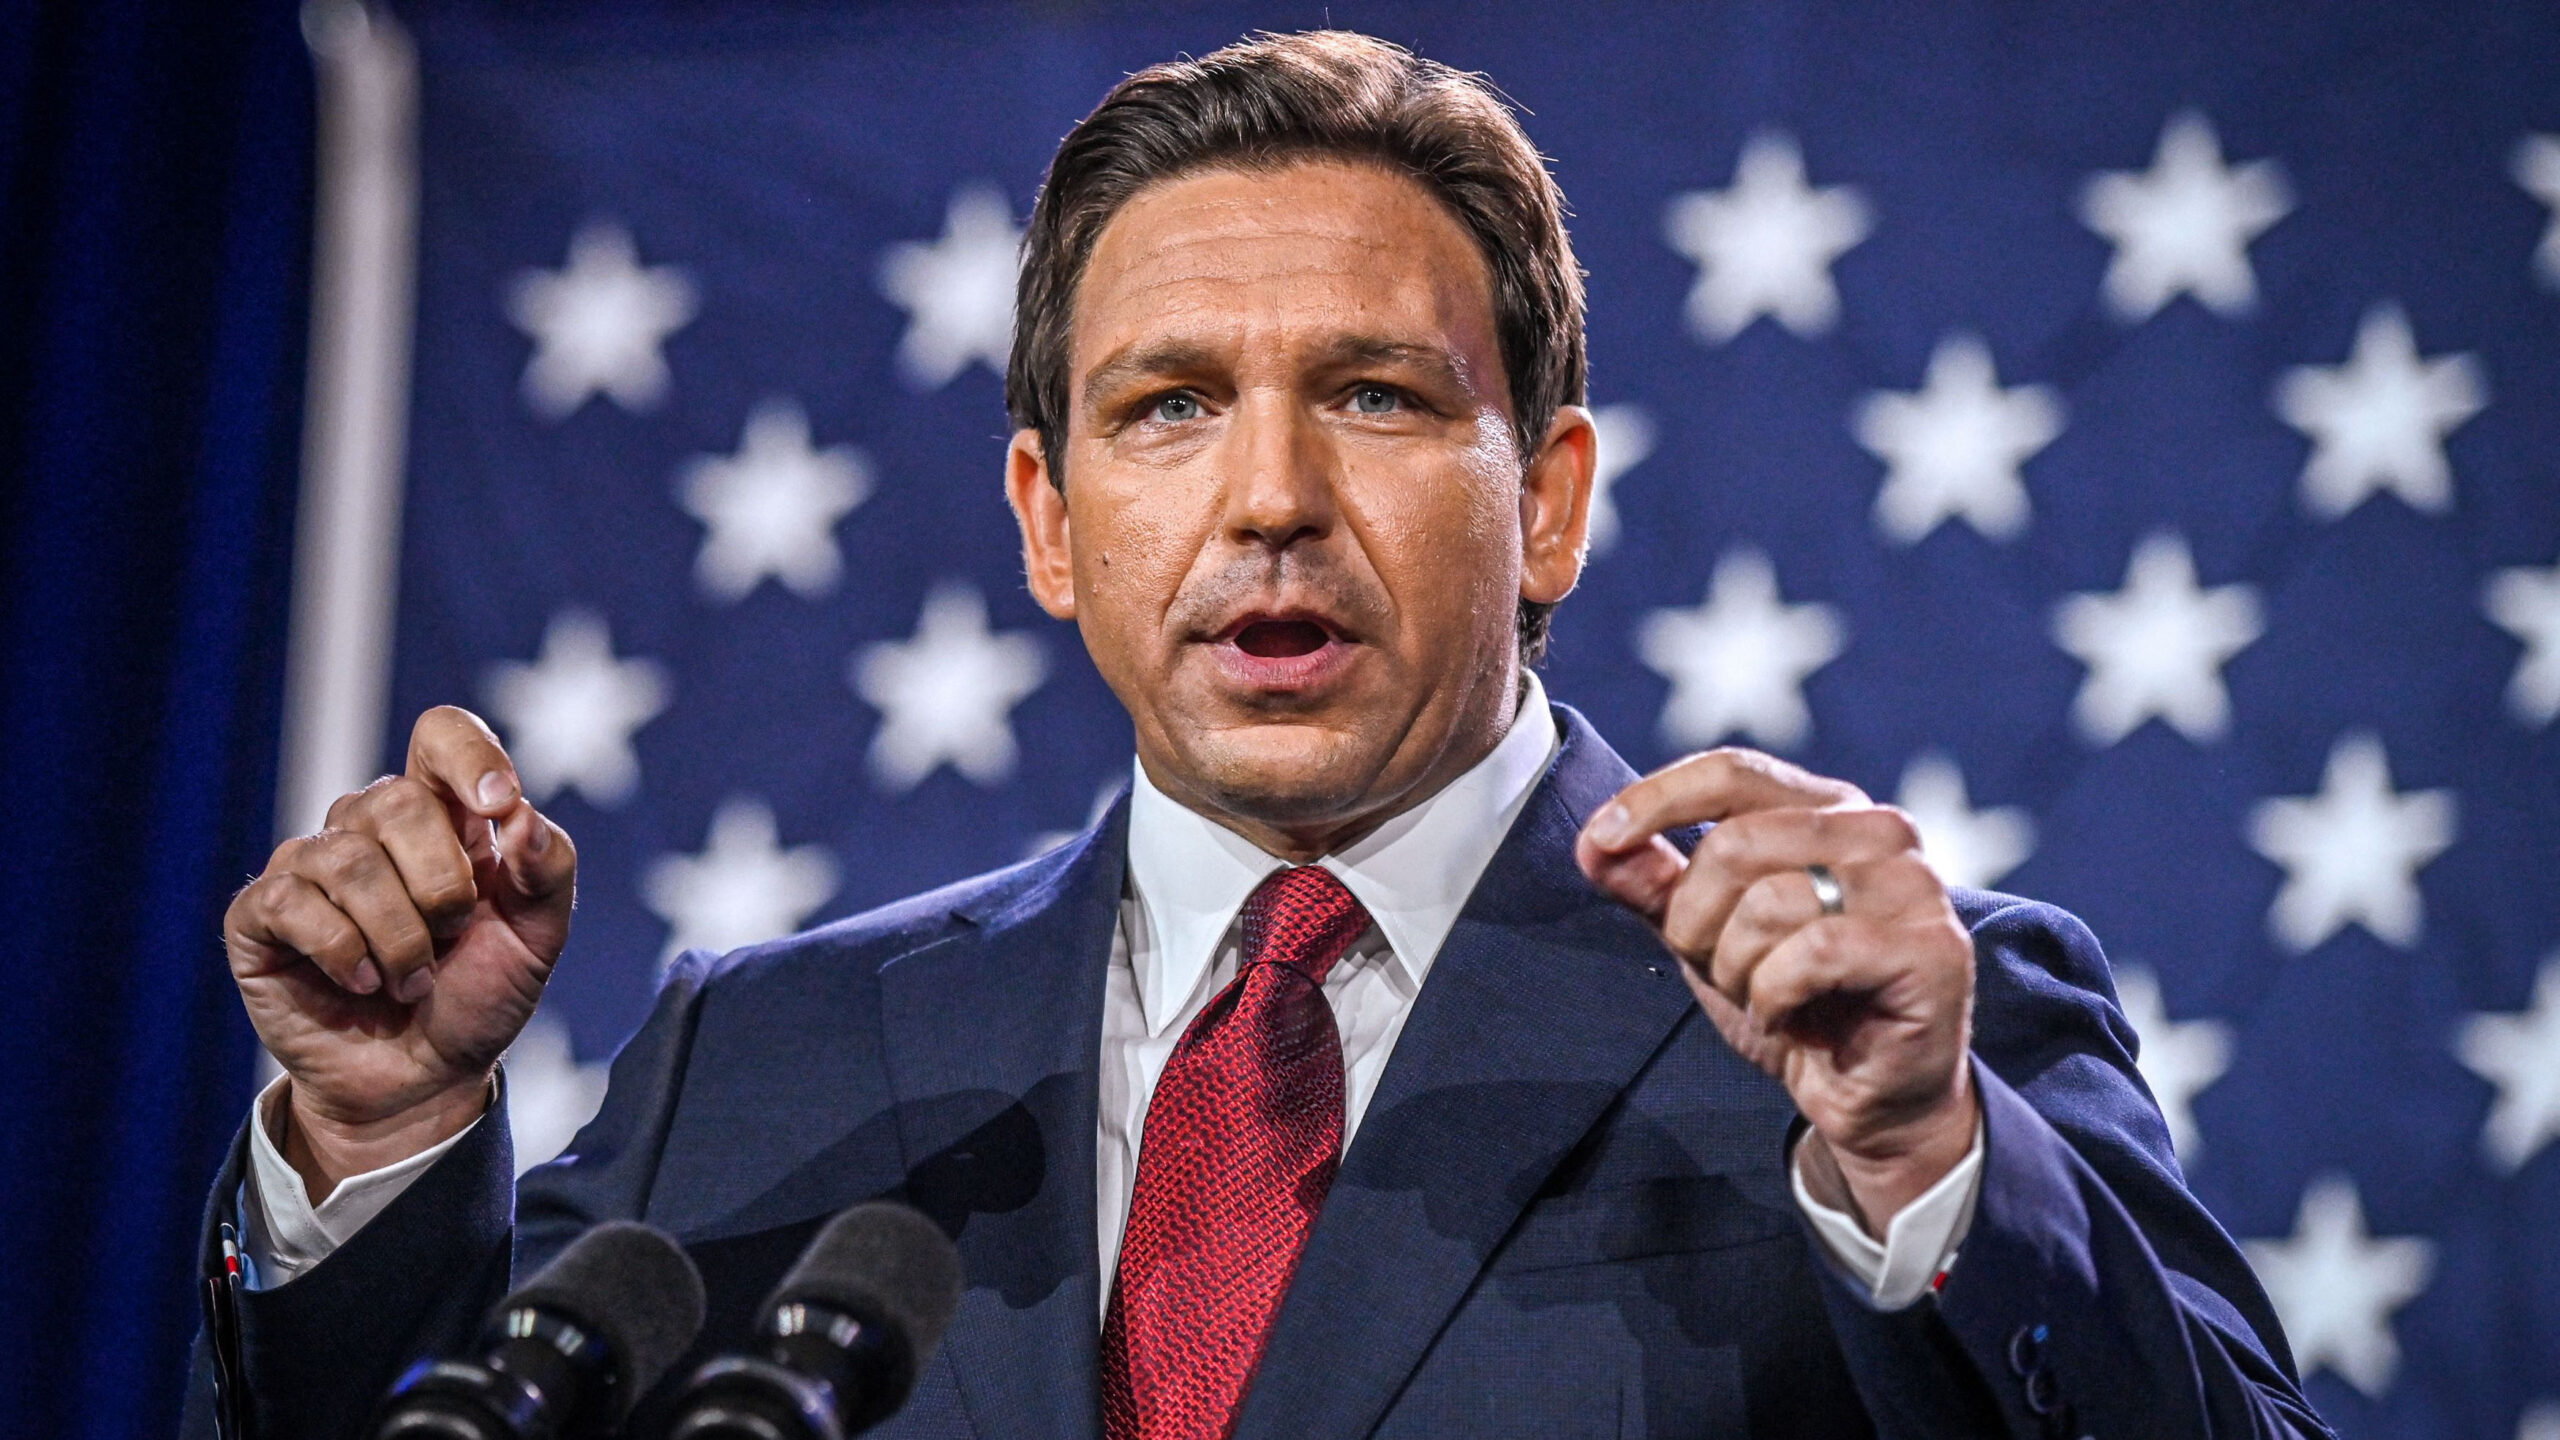 DeSantis criticizes feds for Durham report on Trump-Russia and urged DOJ to prosecute those involved.